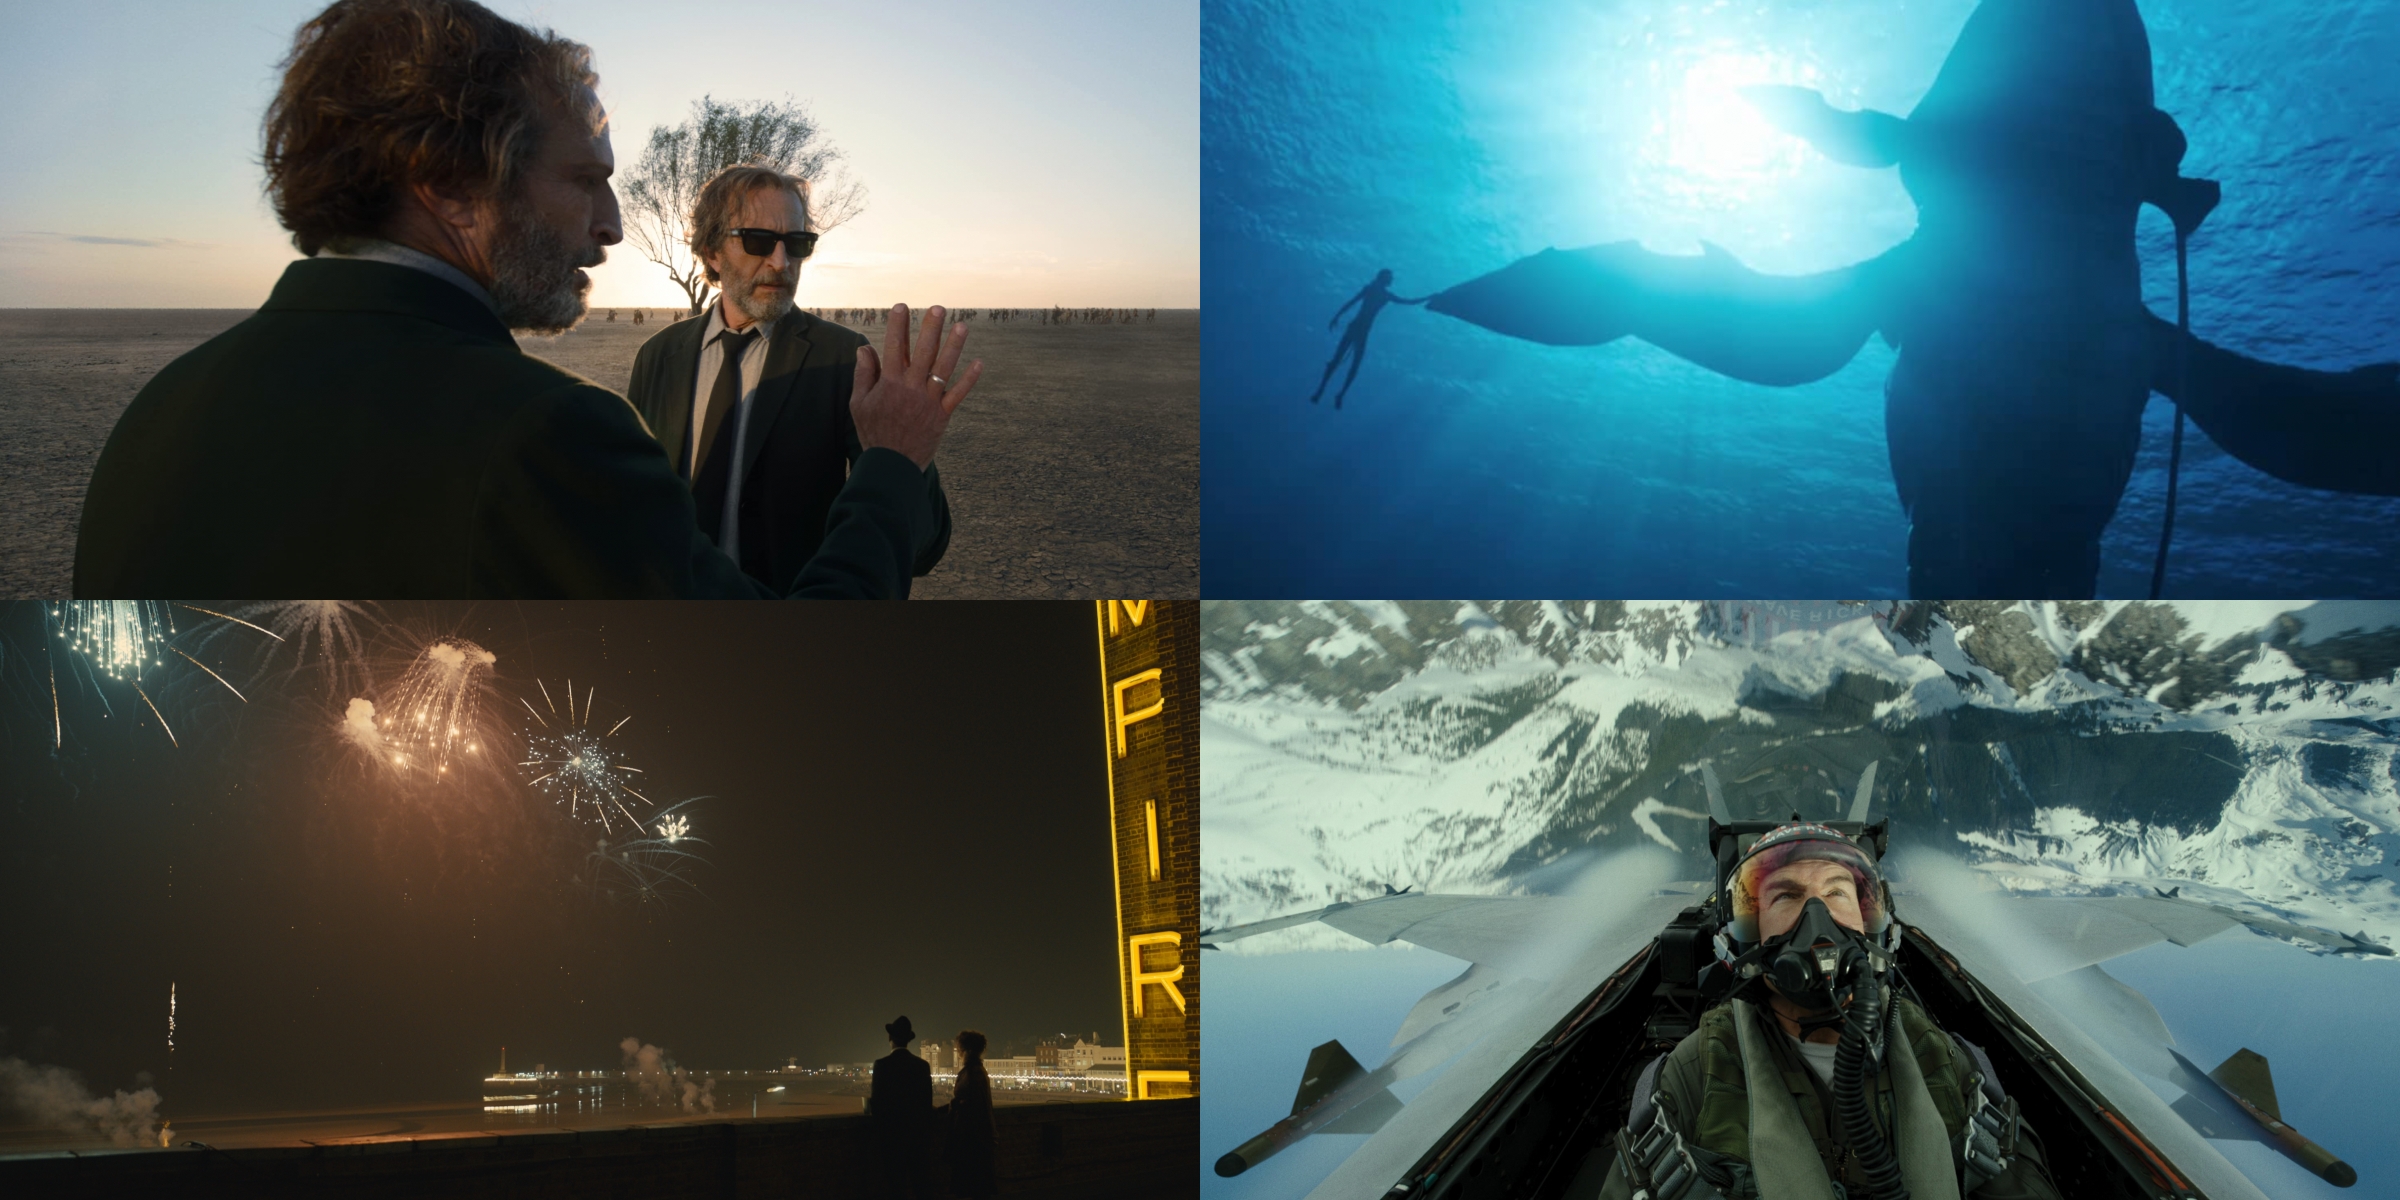 A Dive Into The 2022 Best Cinematography Oscar Race